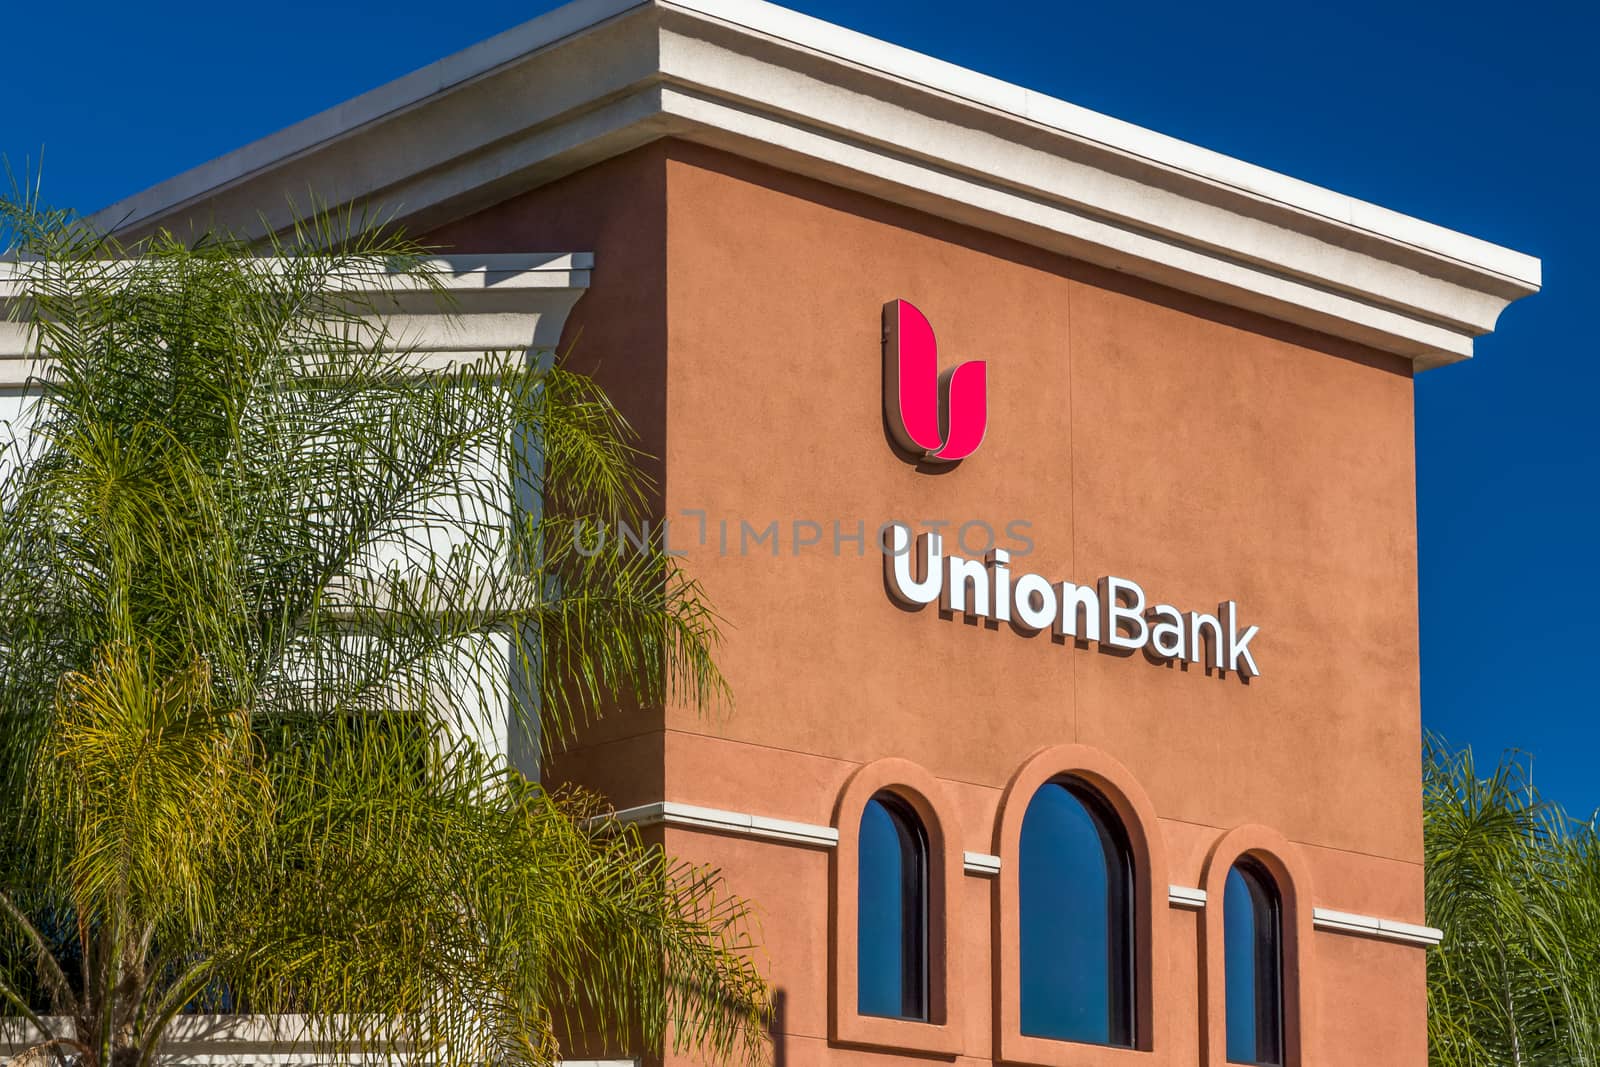 UnionBank Exterior and Logo by wolterk